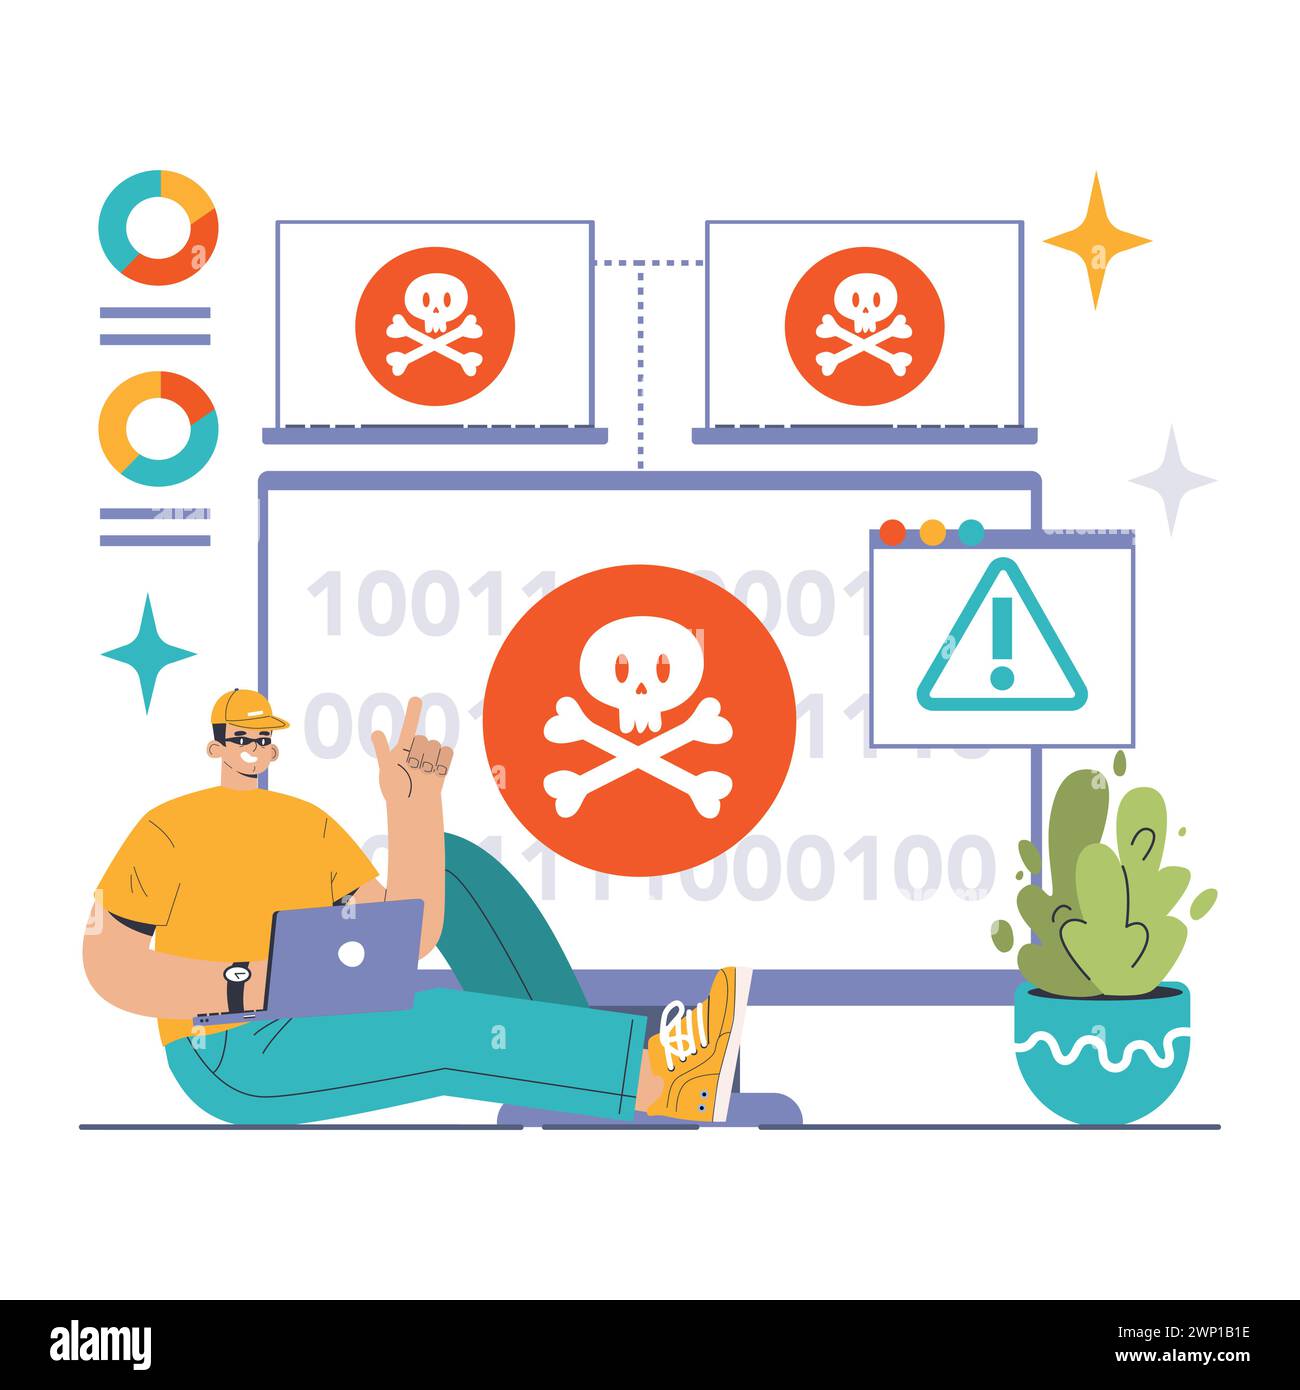 Botnet attack illustration. Hacker orchestrating a network breach with multiple compromised computers, emphasizing cyber vulnerability. Stay alert, secure devices. Flat vector illustration Stock Vector